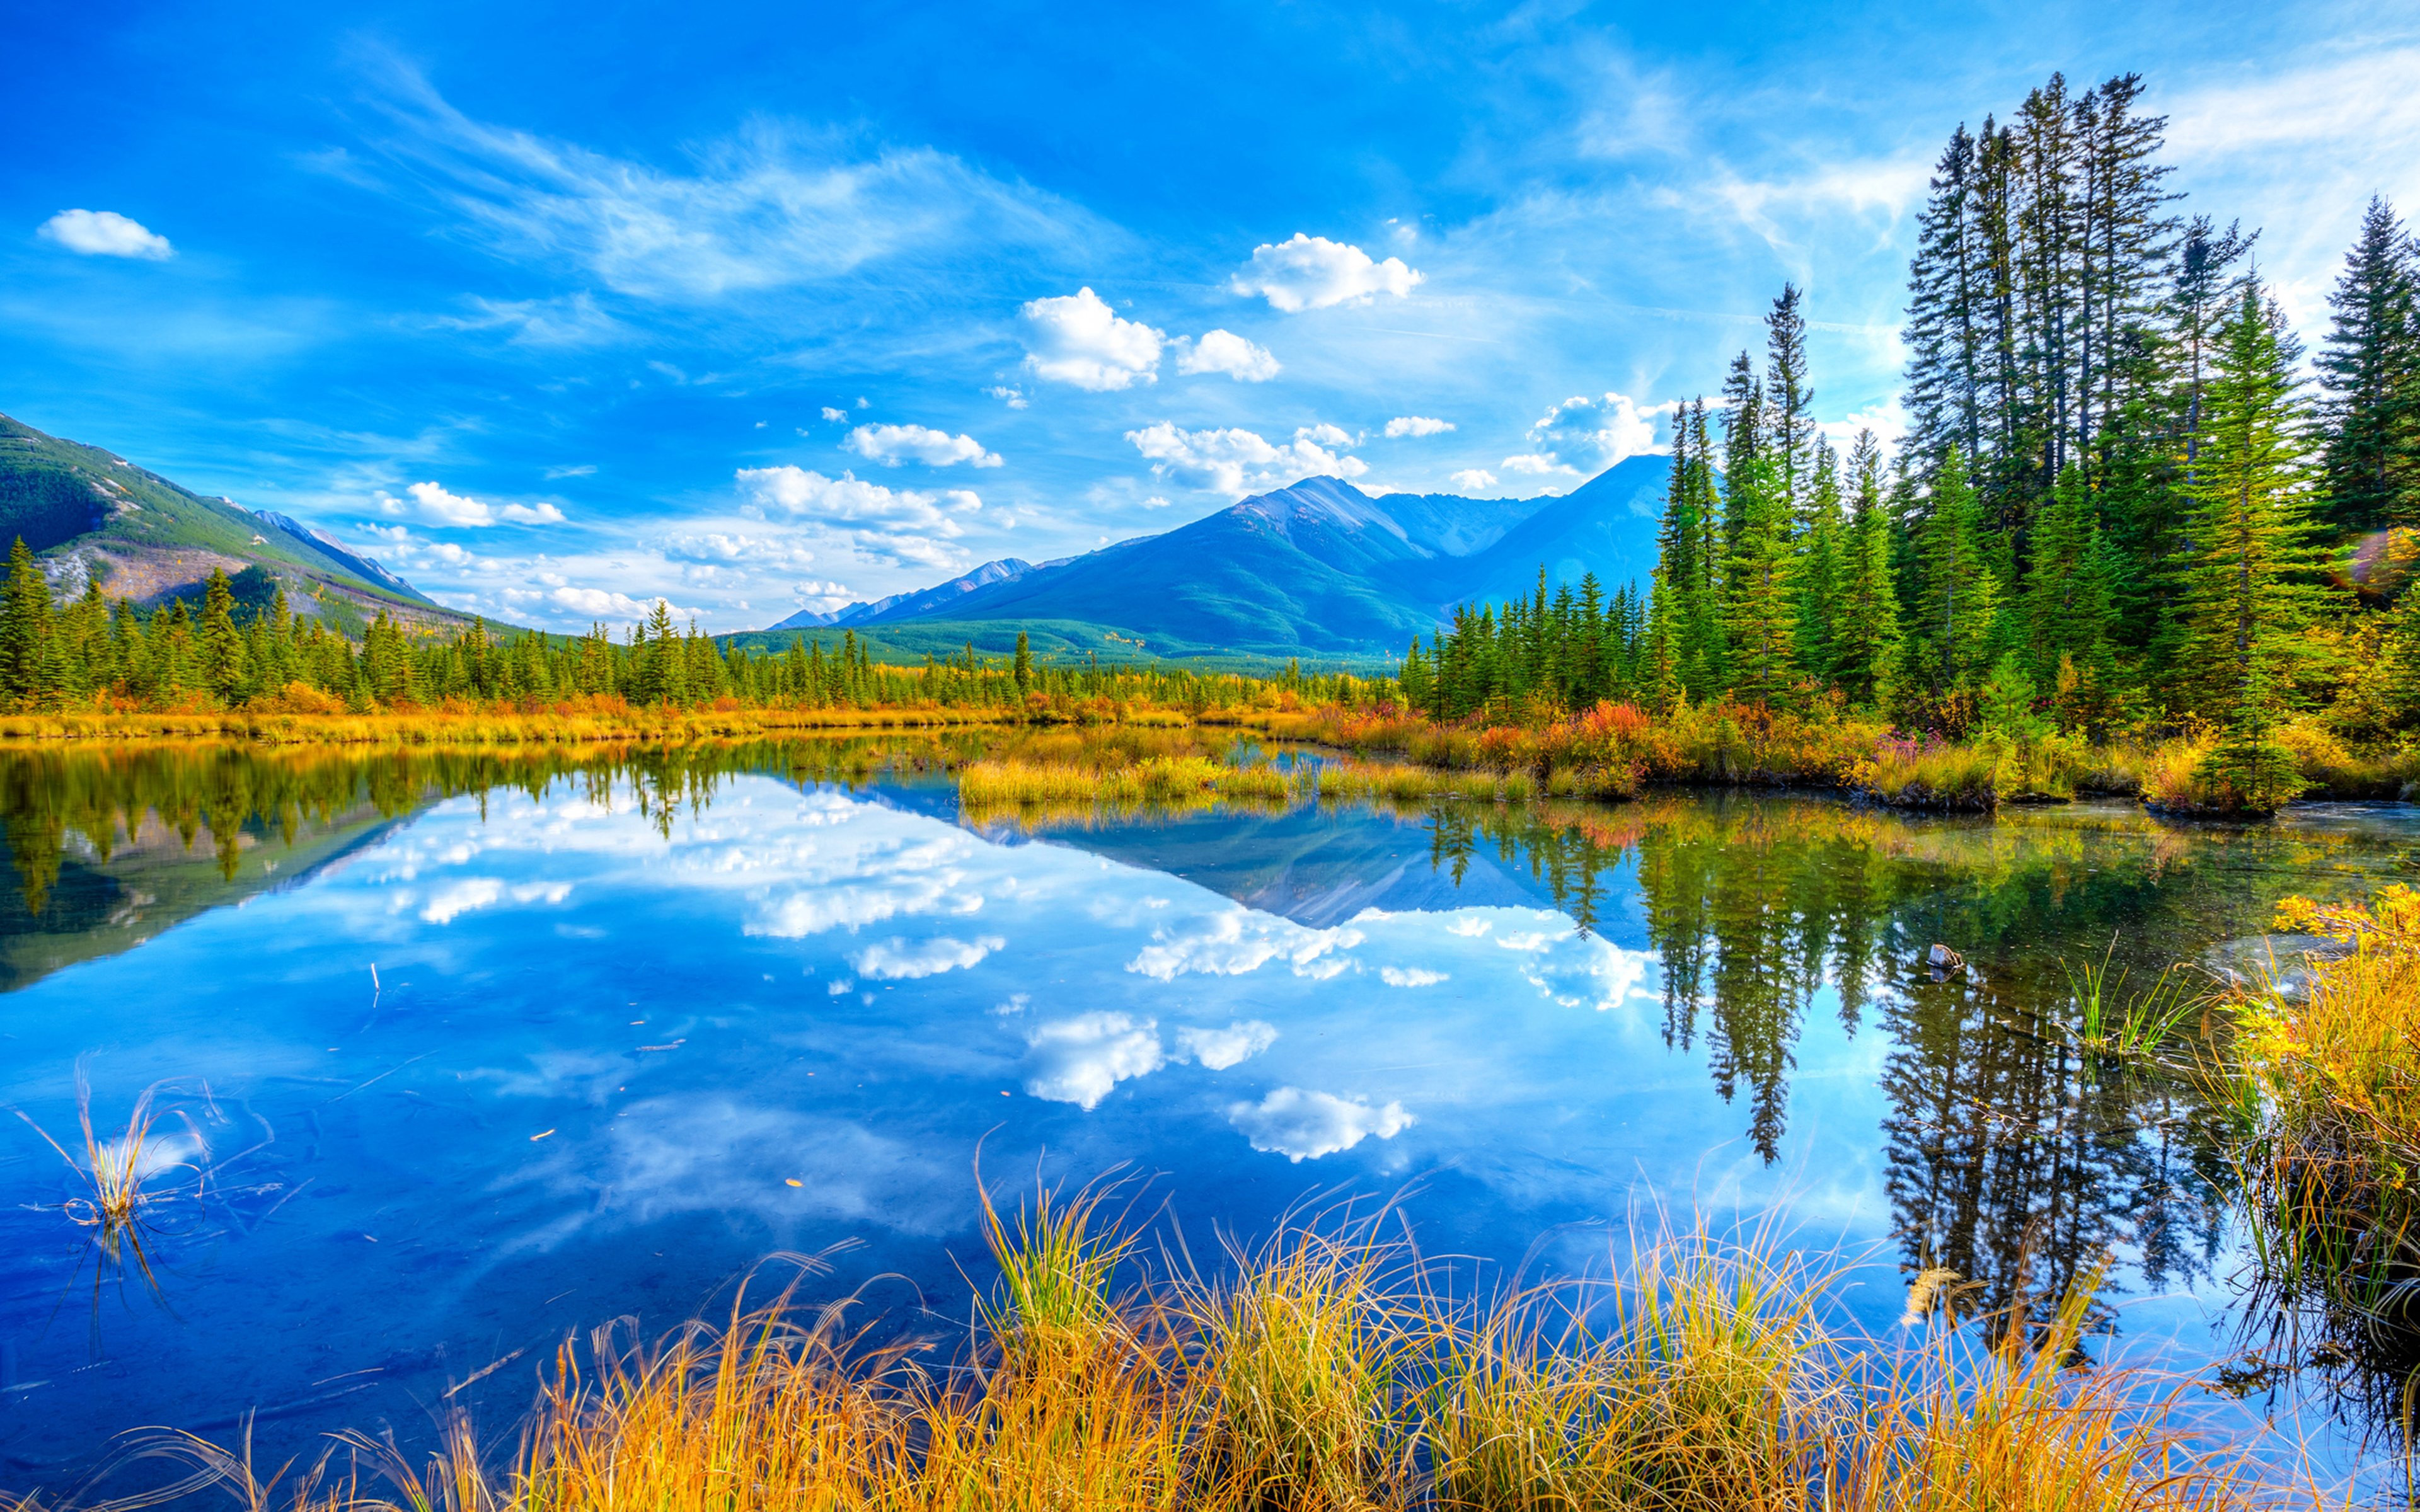 Lake And Yellow Grass, Pine Trees, Reflecting The Blue Sky